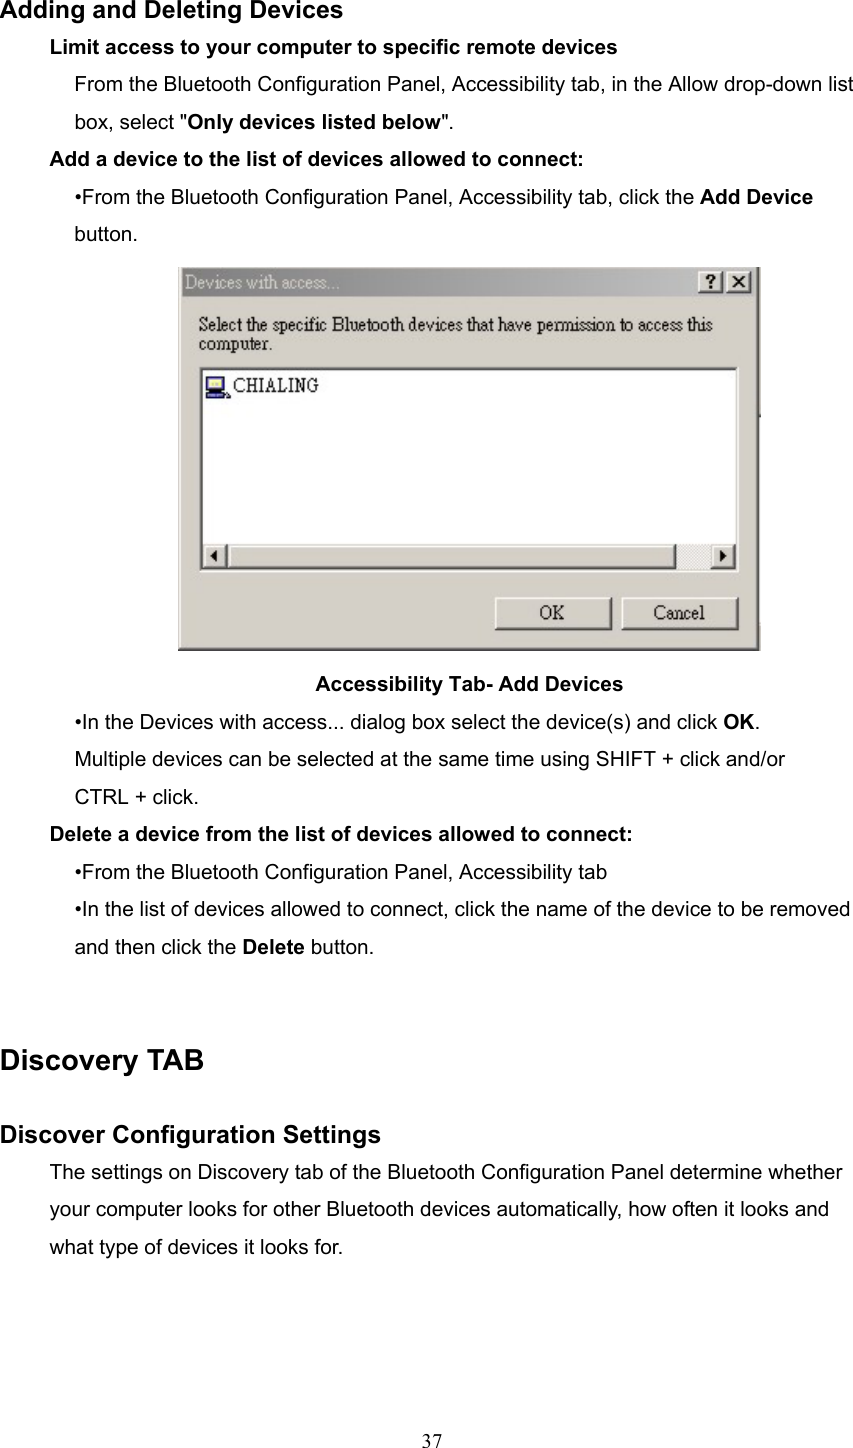  37  Adding and Deleting Devices Limit access to your computer to specific remote devices From the Bluetooth Configuration Panel, Accessibility tab, in the Allow drop-down list box, select &quot;Only devices listed below&quot;. Add a device to the list of devices allowed to connect: •From the Bluetooth Configuration Panel, Accessibility tab, click the Add Device button.  Accessibility Tab- Add Devices •In the Devices with access... dialog box select the device(s) and click OK. Multiple devices can be selected at the same time using SHIFT + click and/or CTRL + click. Delete a device from the list of devices allowed to connect: •From the Bluetooth Configuration Panel, Accessibility tab •In the list of devices allowed to connect, click the name of the device to be removed and then click the Delete button.   Discovery TAB  Discover Configuration Settings The settings on Discovery tab of the Bluetooth Configuration Panel determine whether your computer looks for other Bluetooth devices automatically, how often it looks and what type of devices it looks for. 